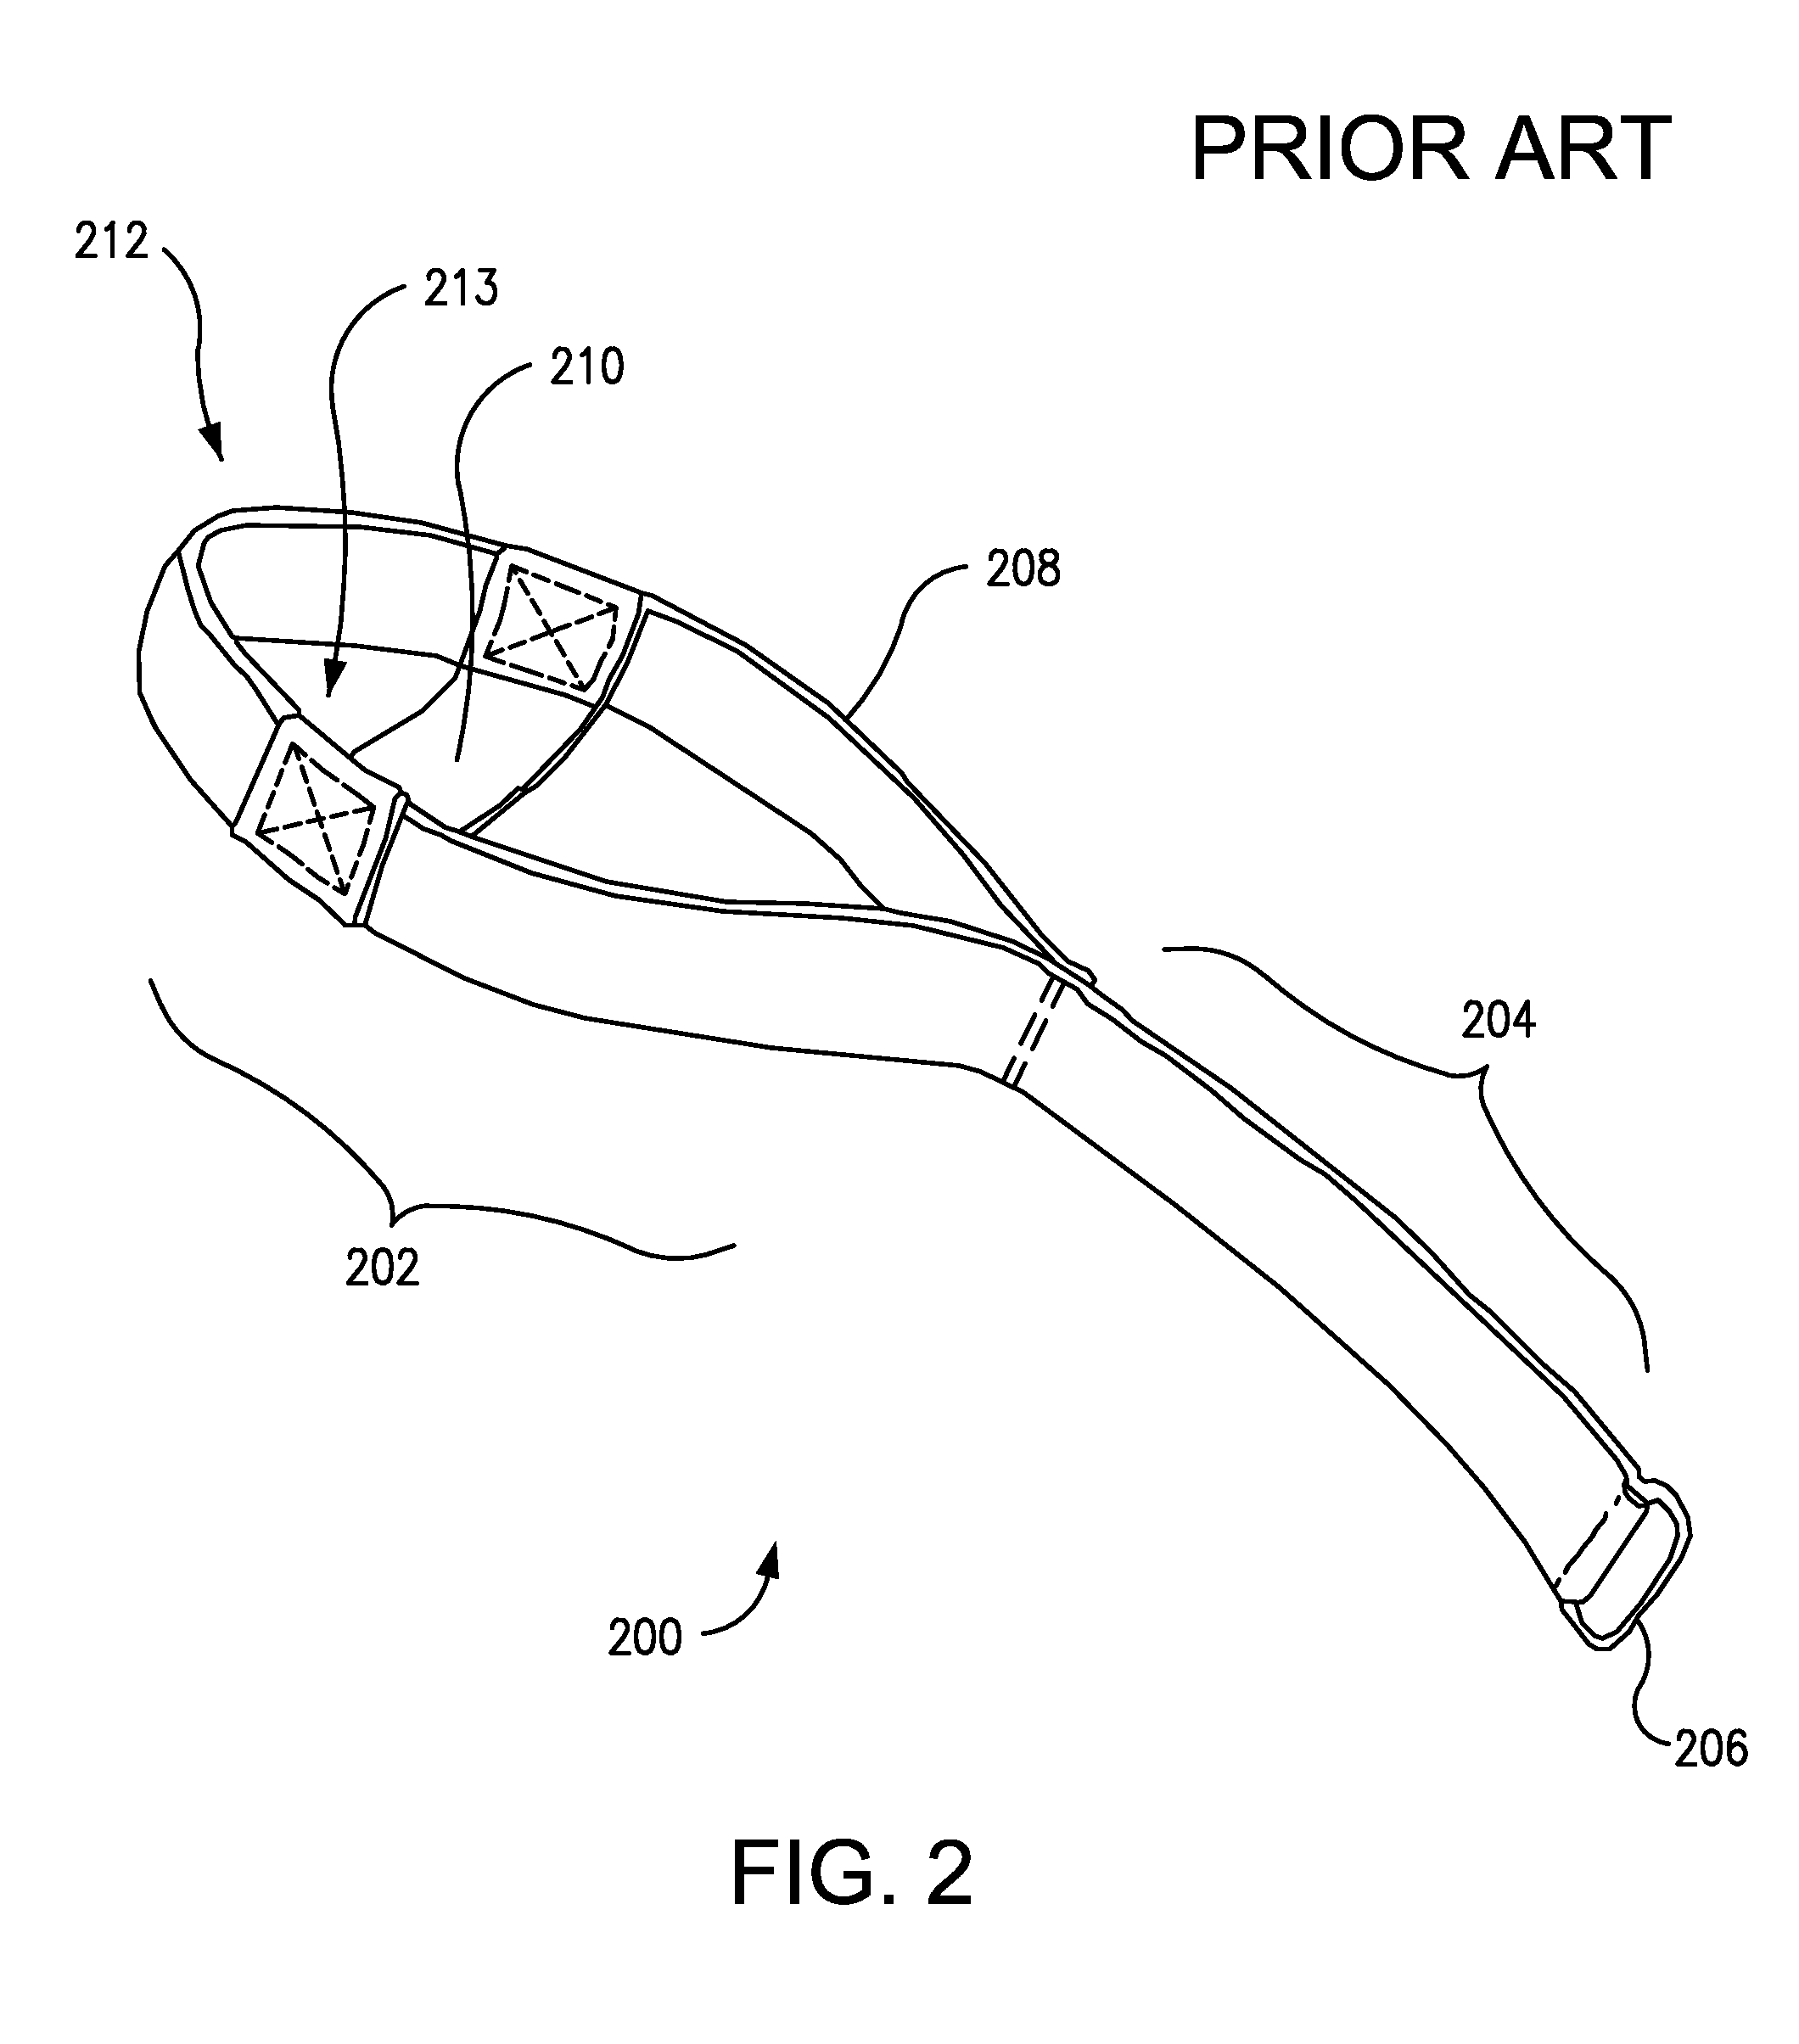 Lower extremity receiving device for providing enhanced leg mobility during lower body exercise